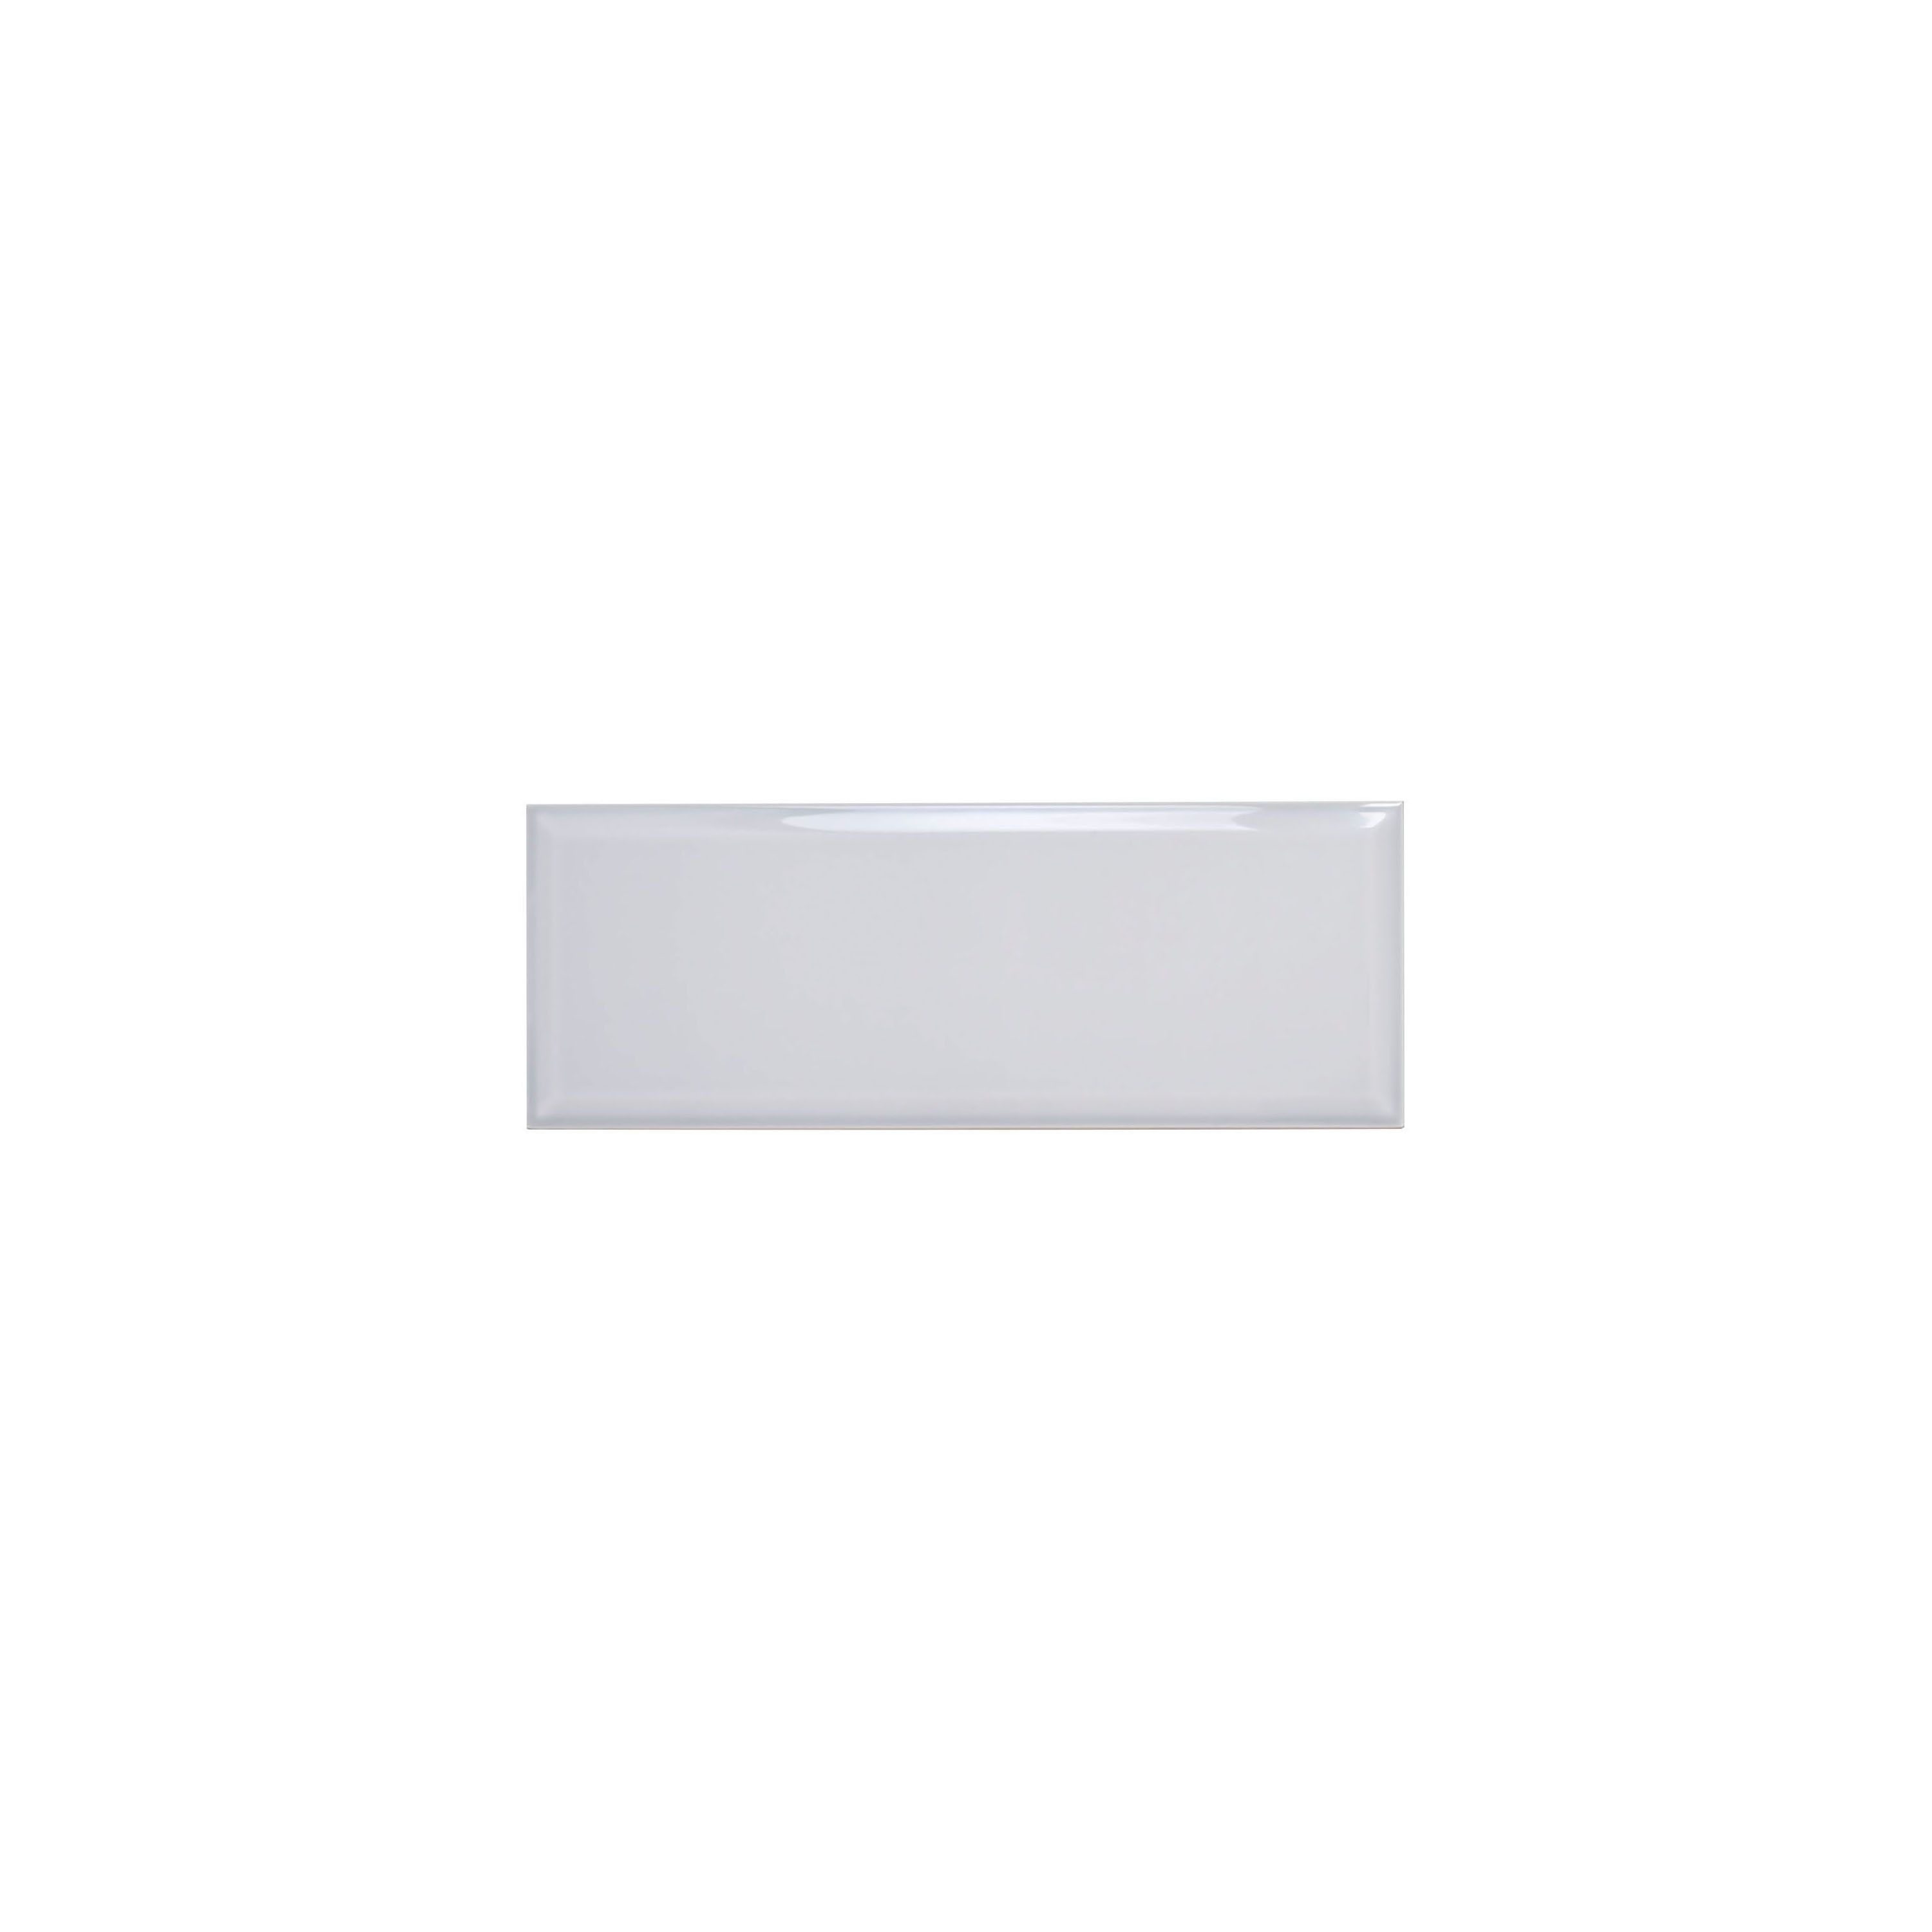 Bevel Dove Grey Gloss Ceramic Wall Tile, Pack of 17, (L)400mm (W)150mm